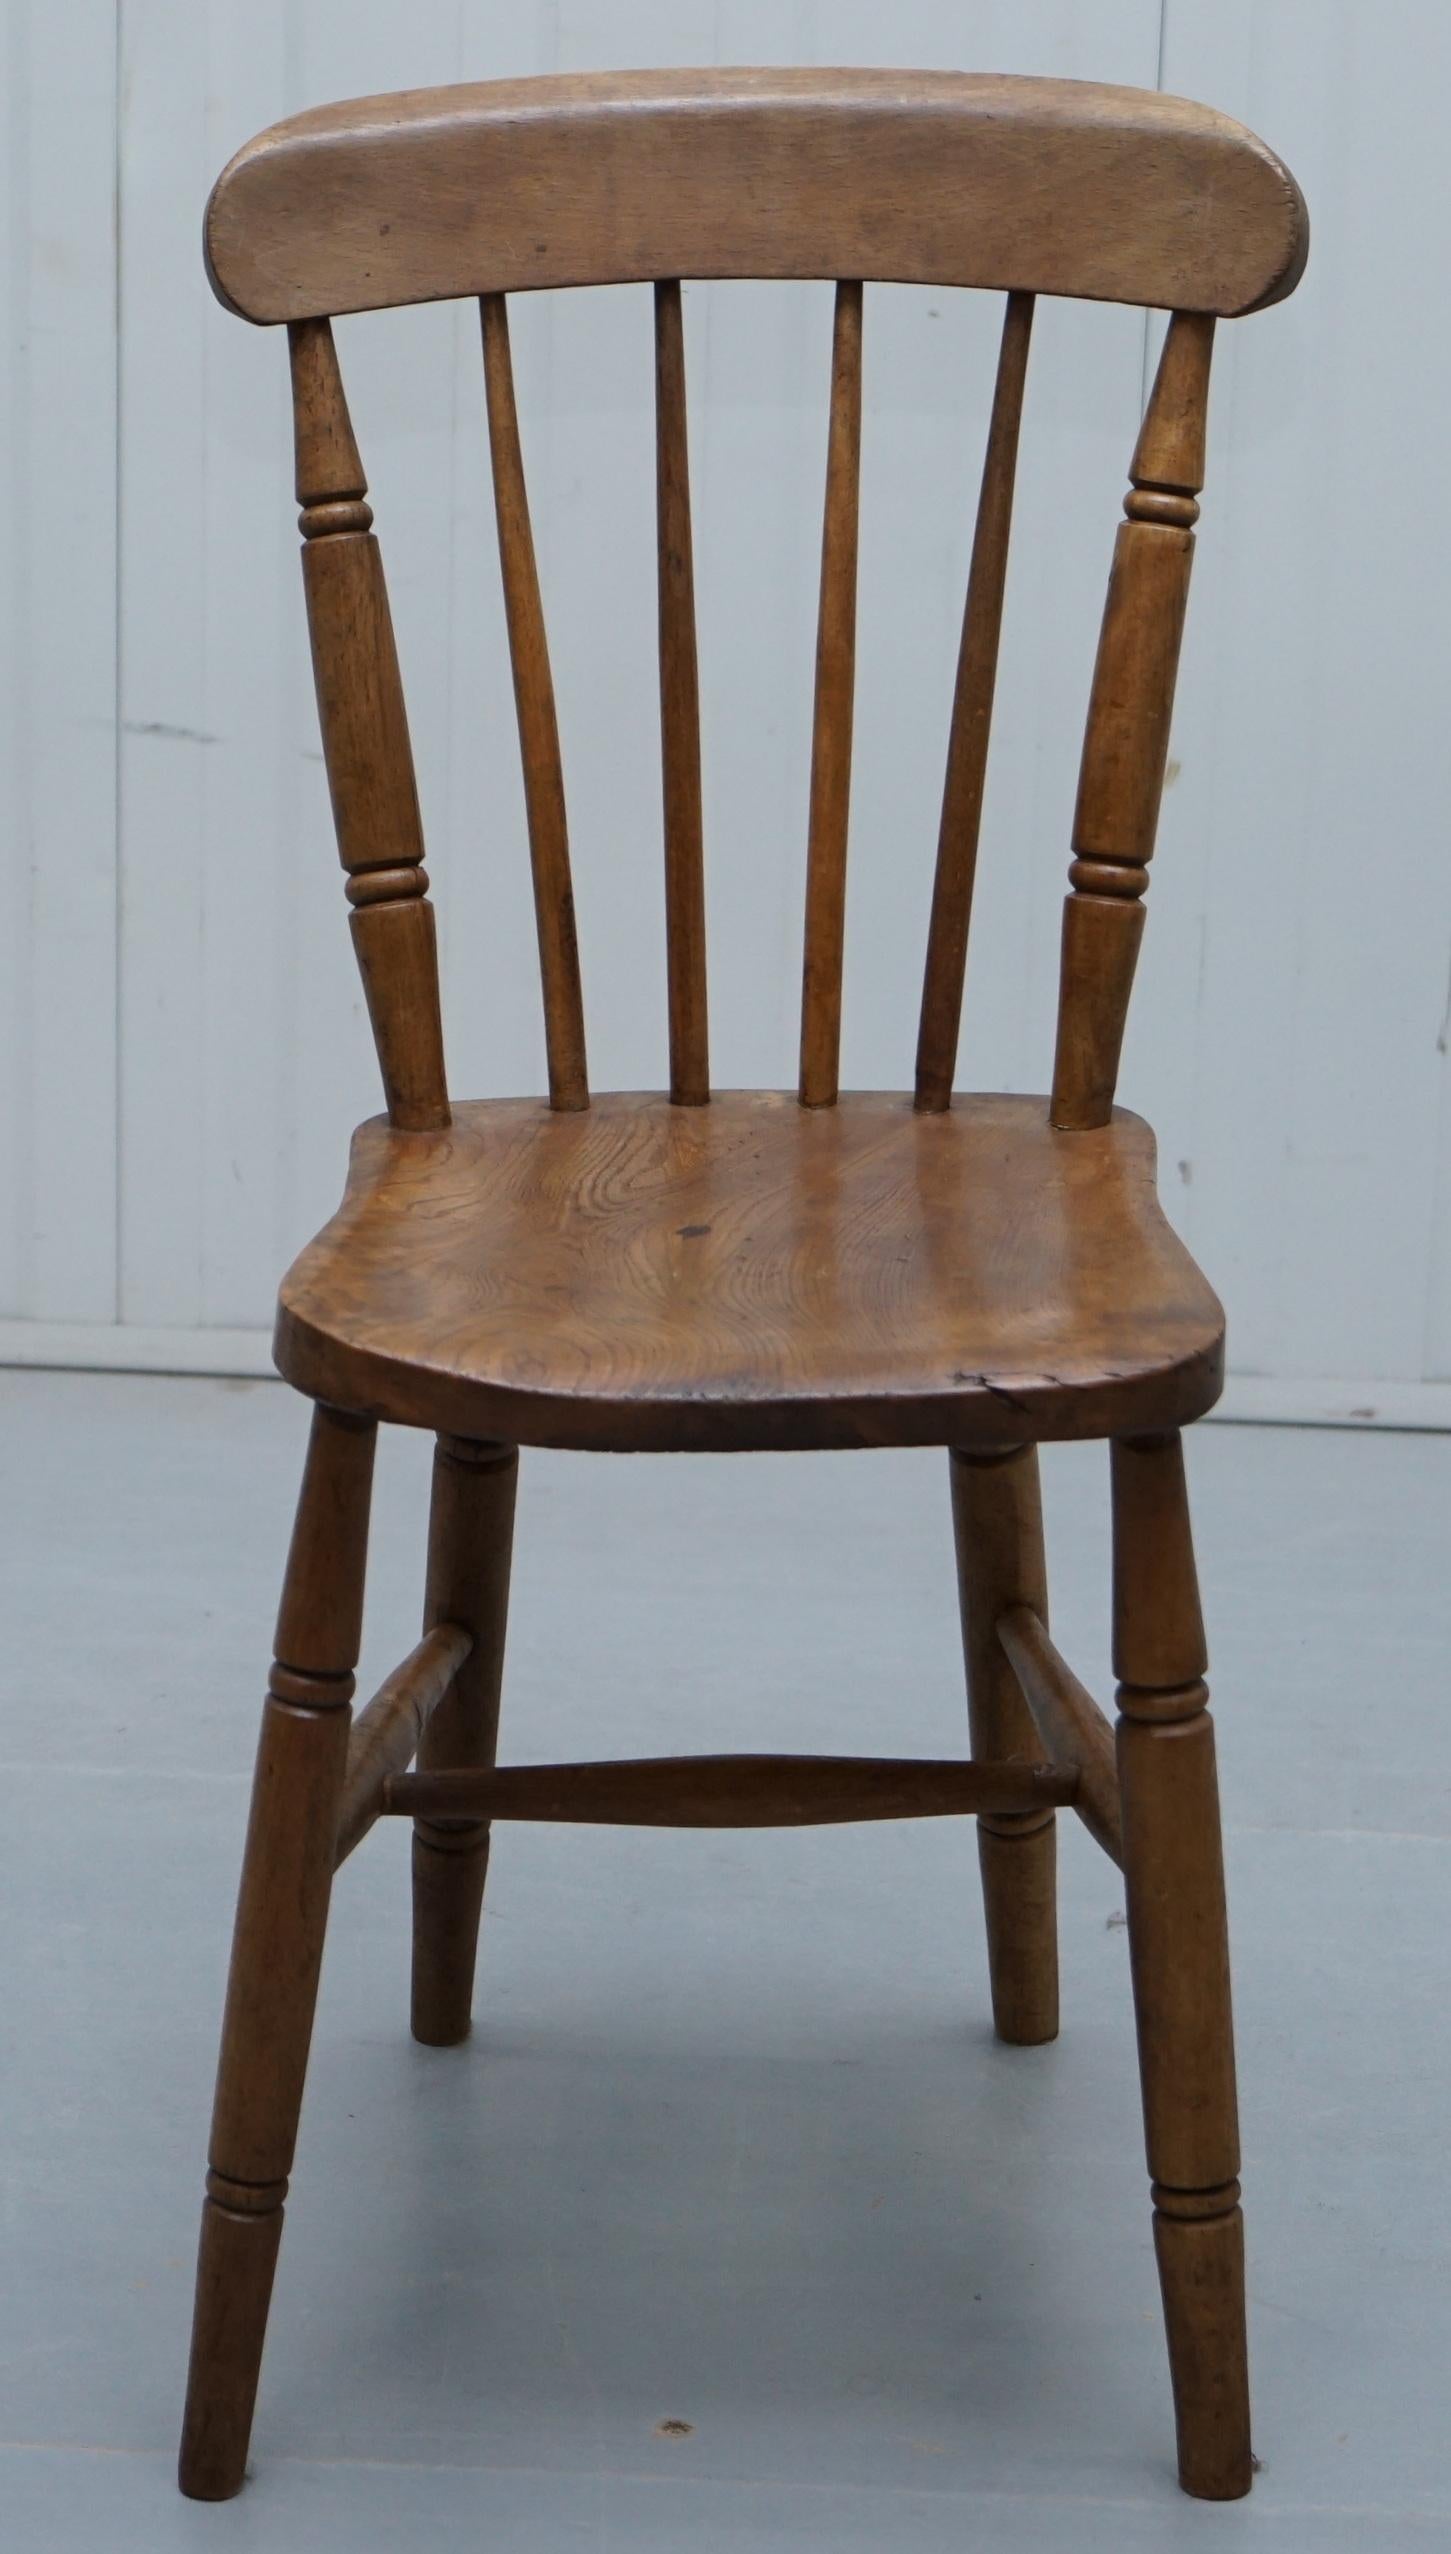 We are delighted to offer for sale very rare Victorian Elm Windsor Spindle back dining chair 

The chair is hand carved from a solid slab of elm, the seat base has a lovely timber grain, the frames are solid, a little bowed in places from decades